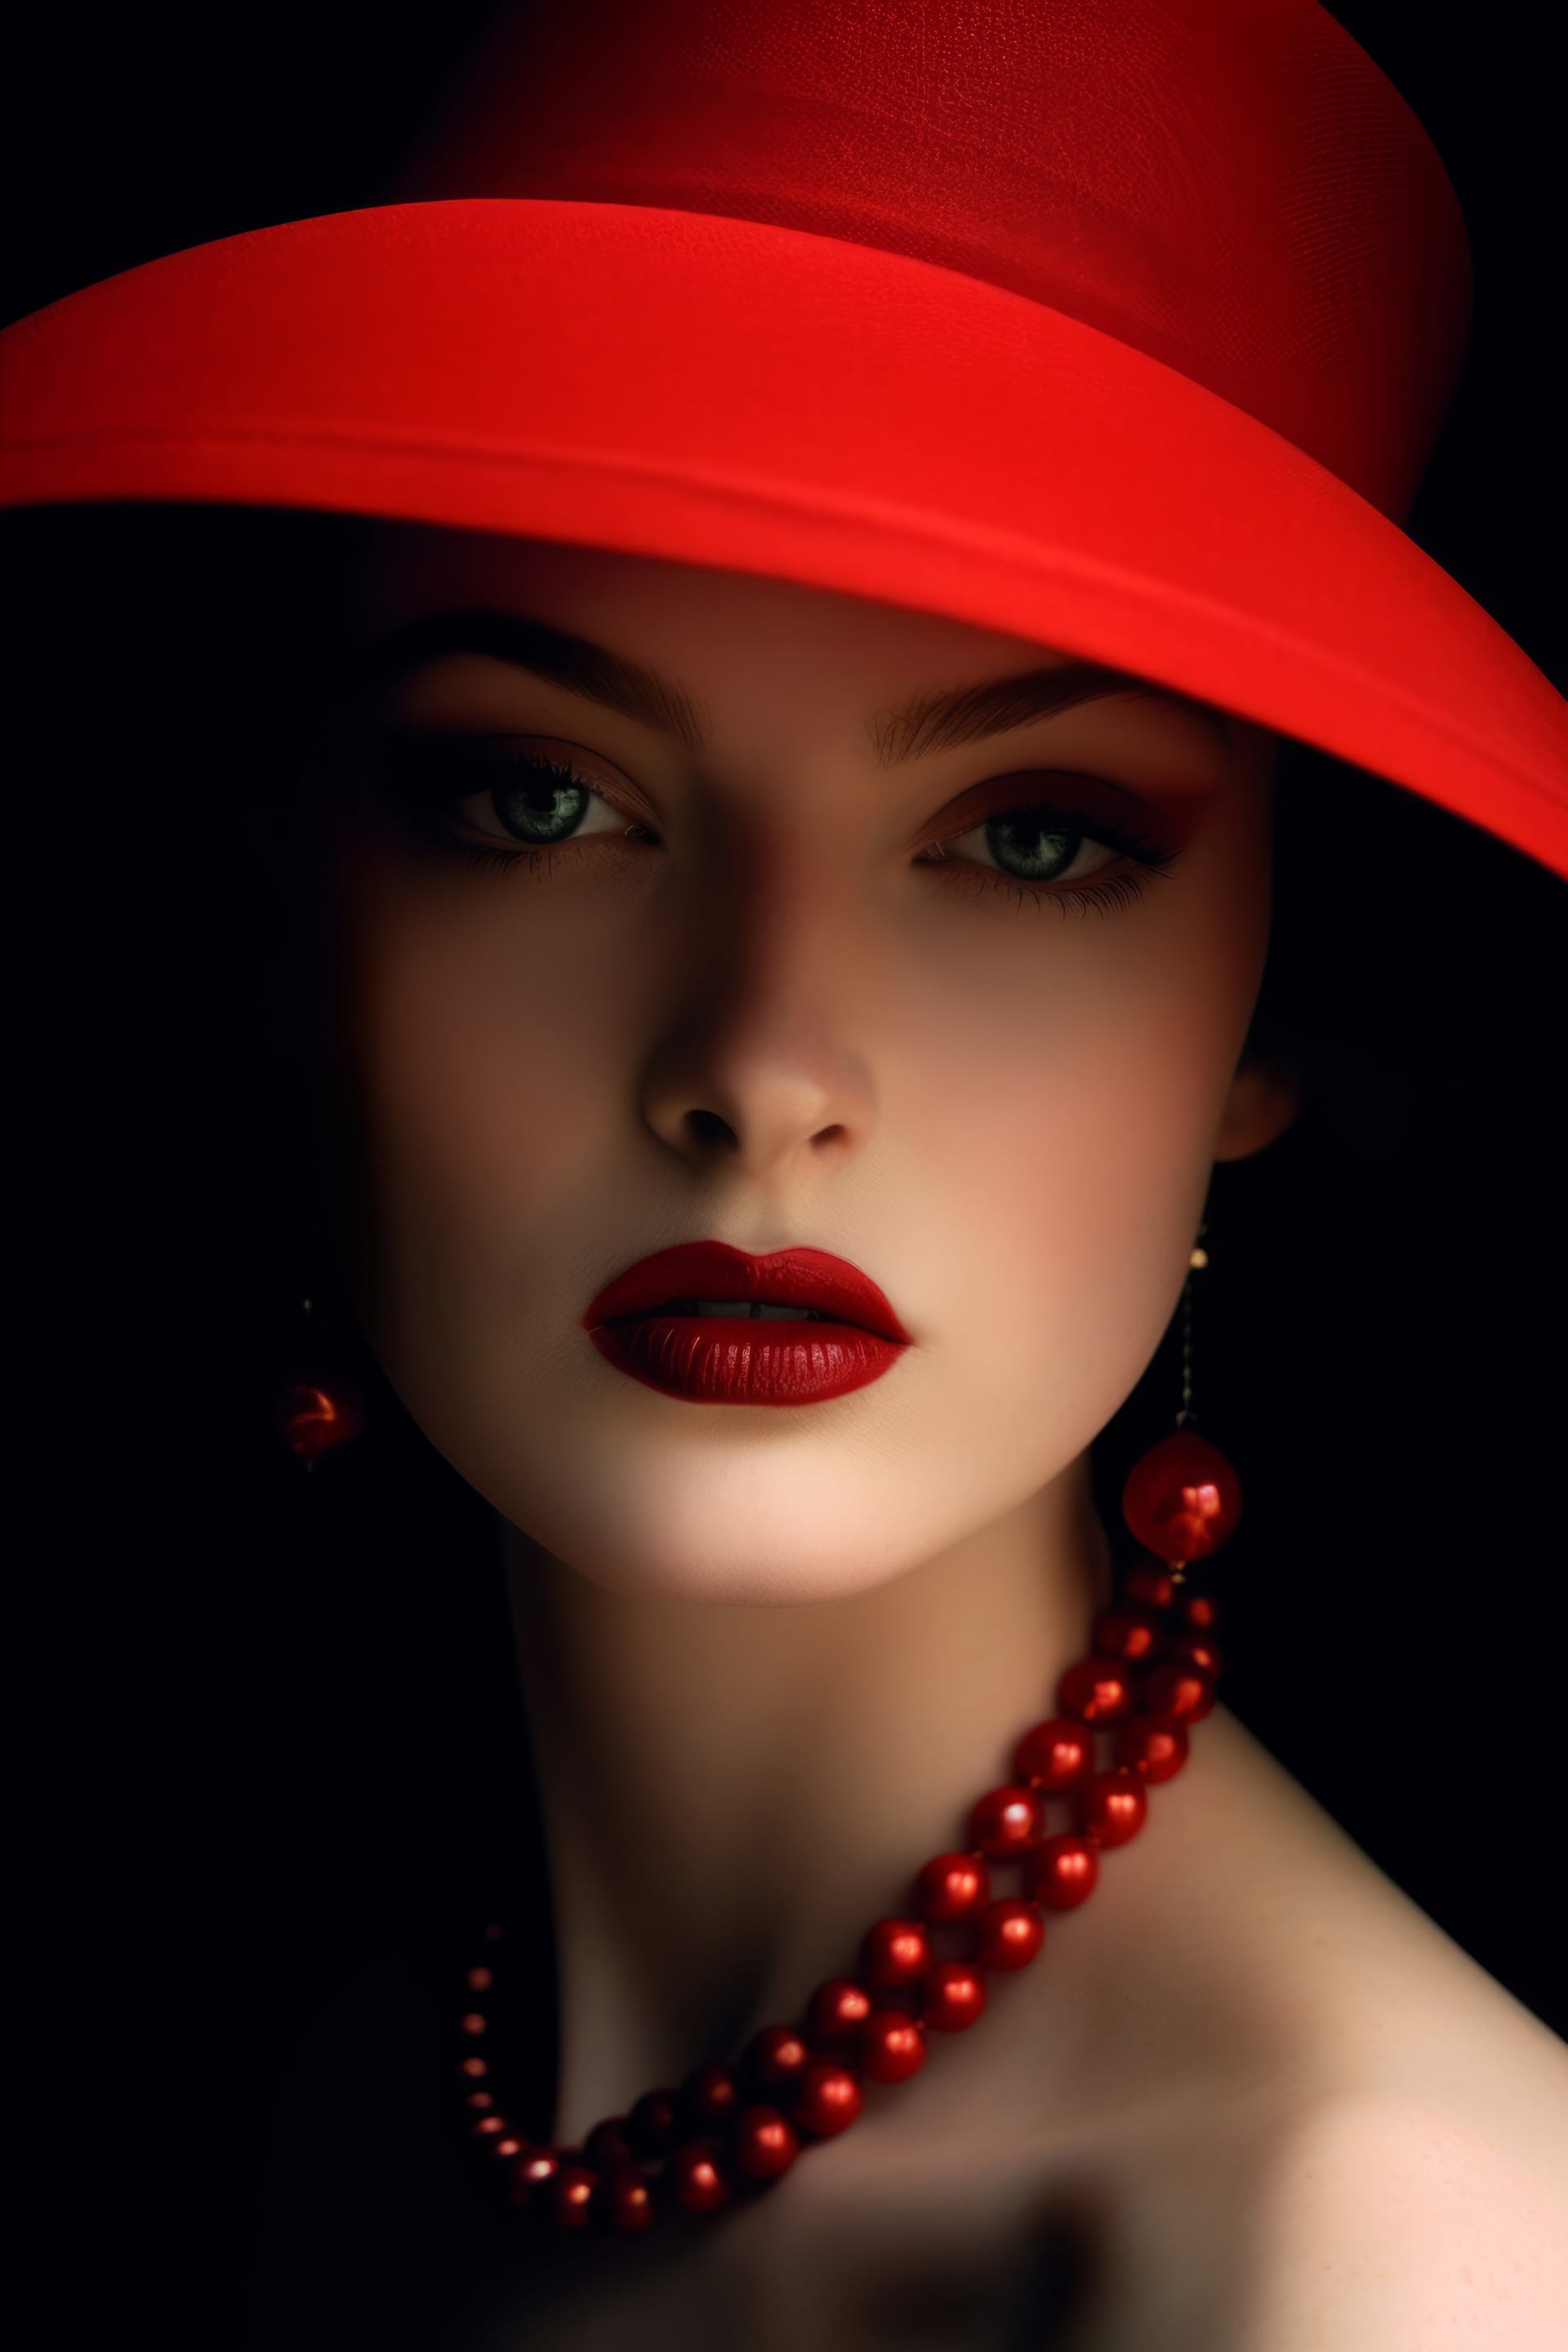 Best instagram profile pictures woman red hat earrings